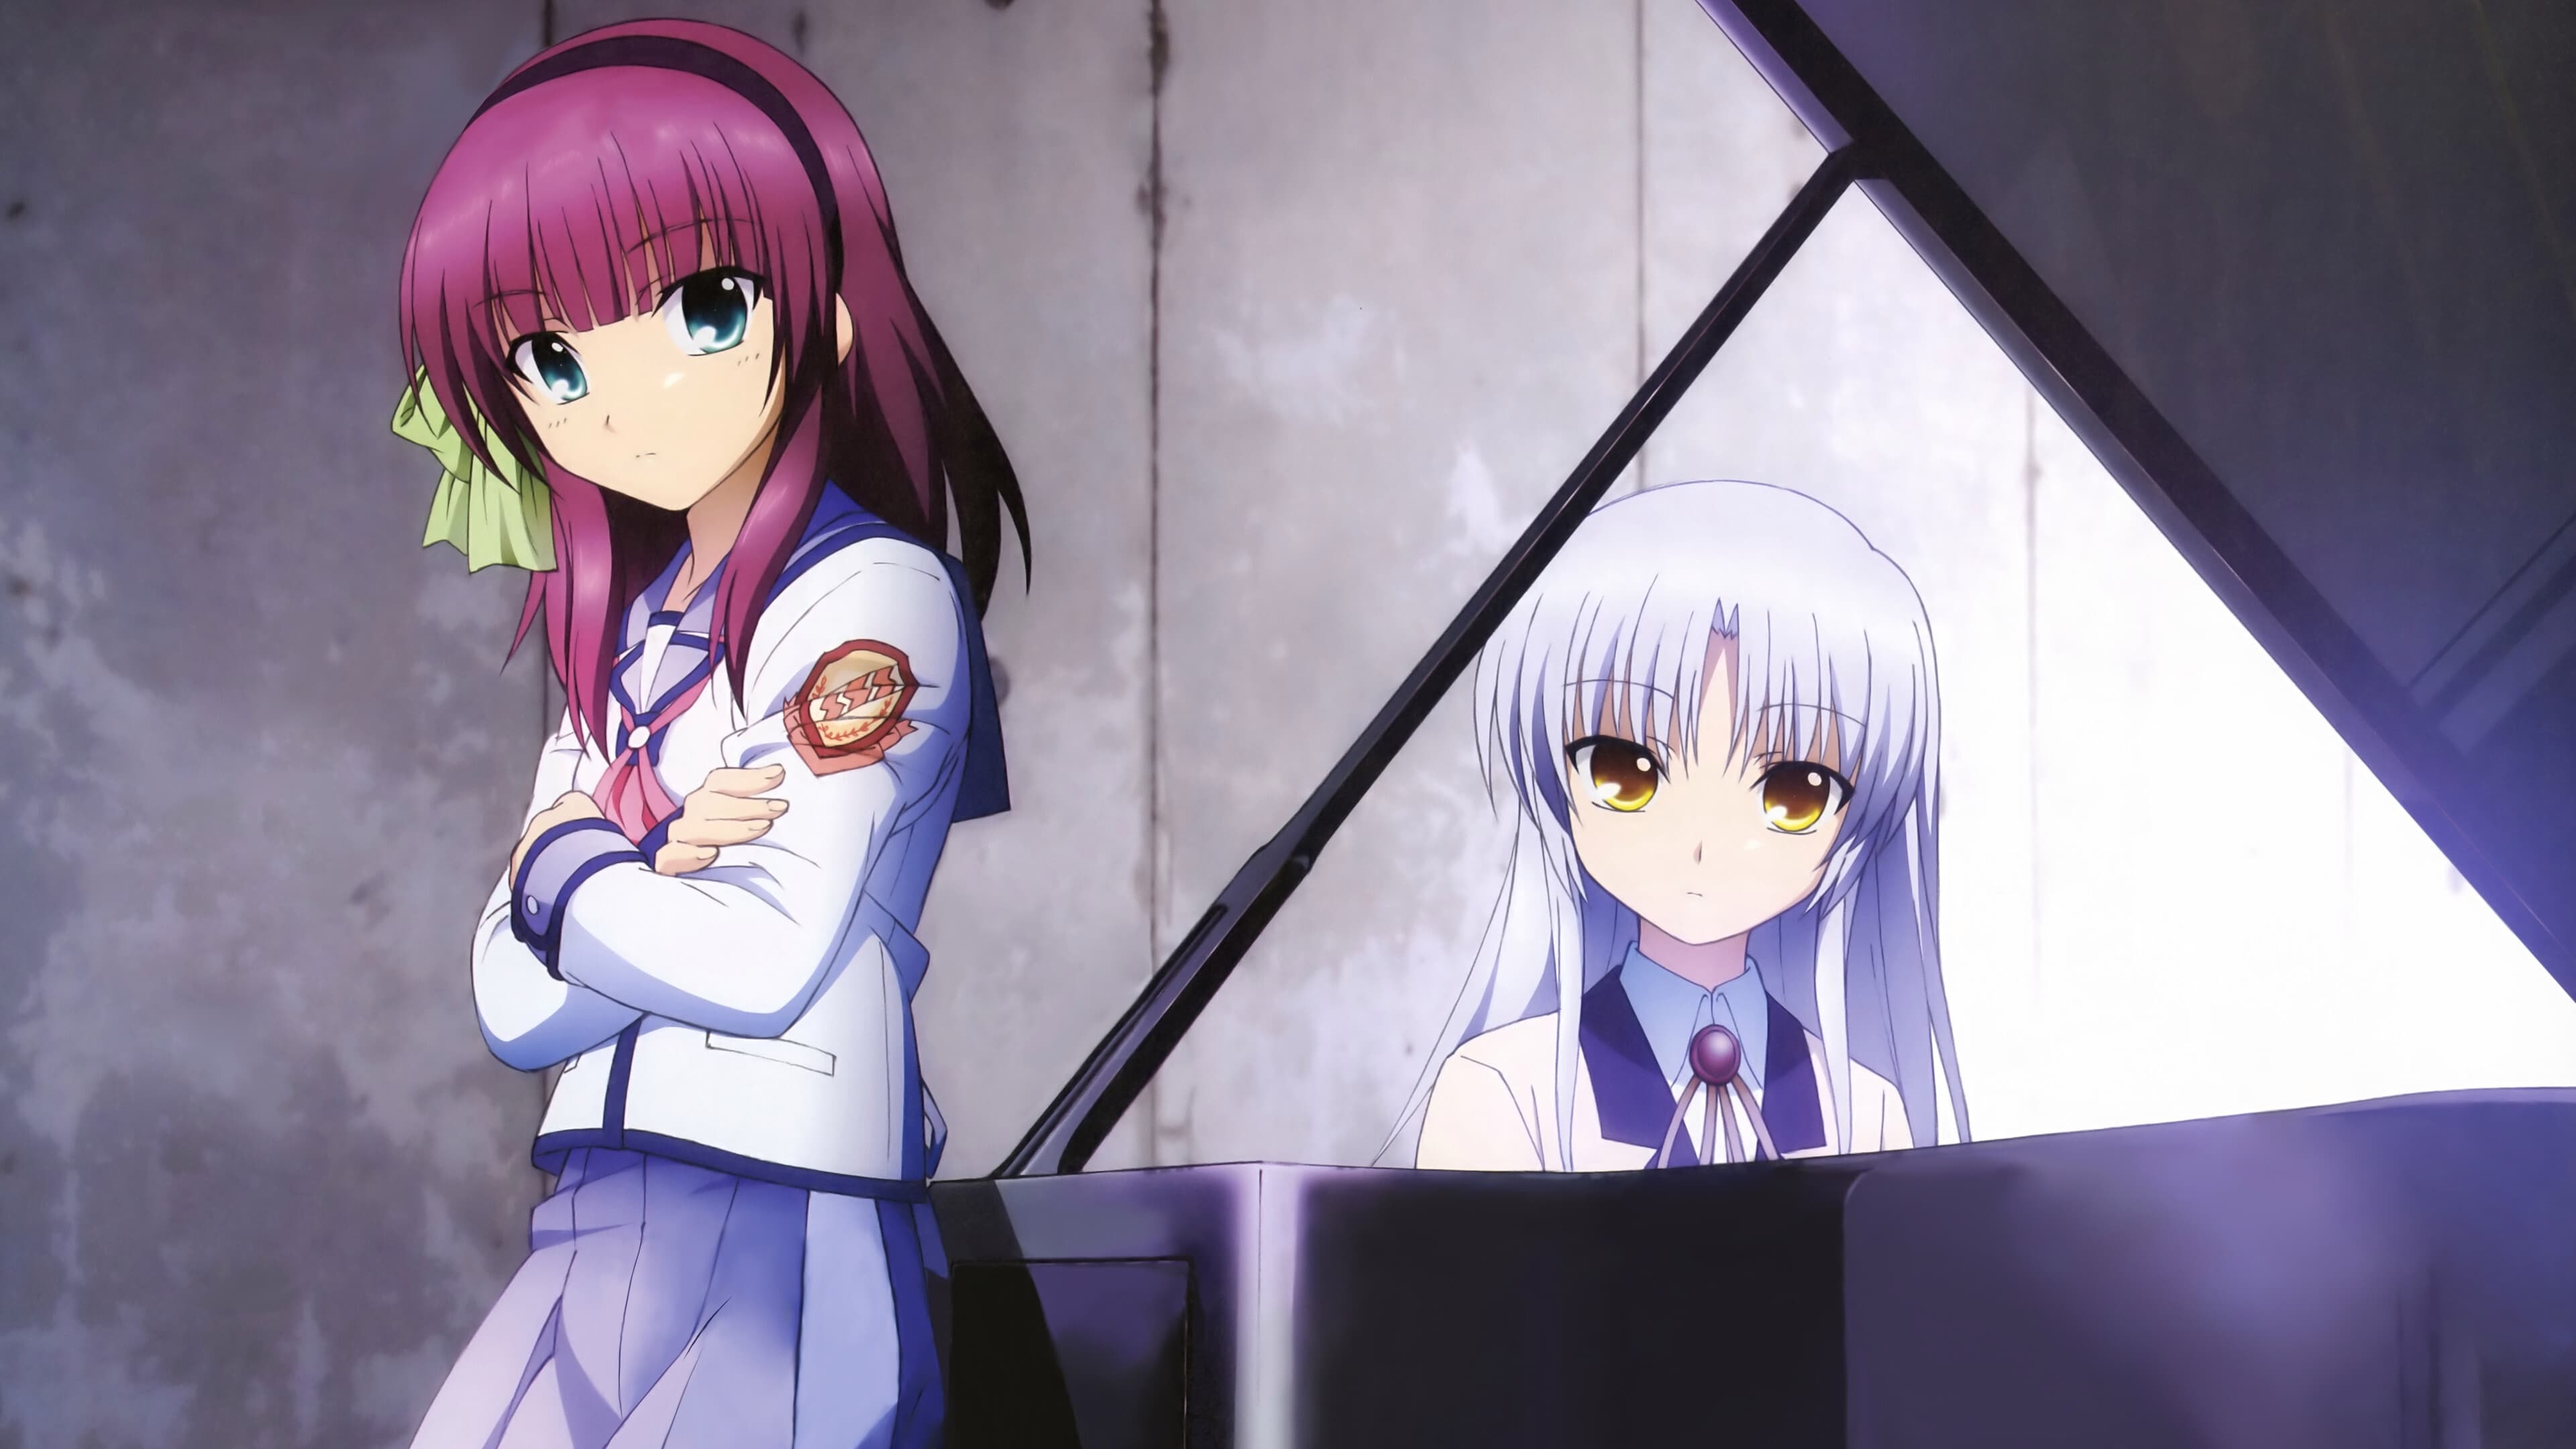 Angel Beats! (Anime): Show produced by P.A.Works and Aniplex. 3840x2160 4K Wallpaper.